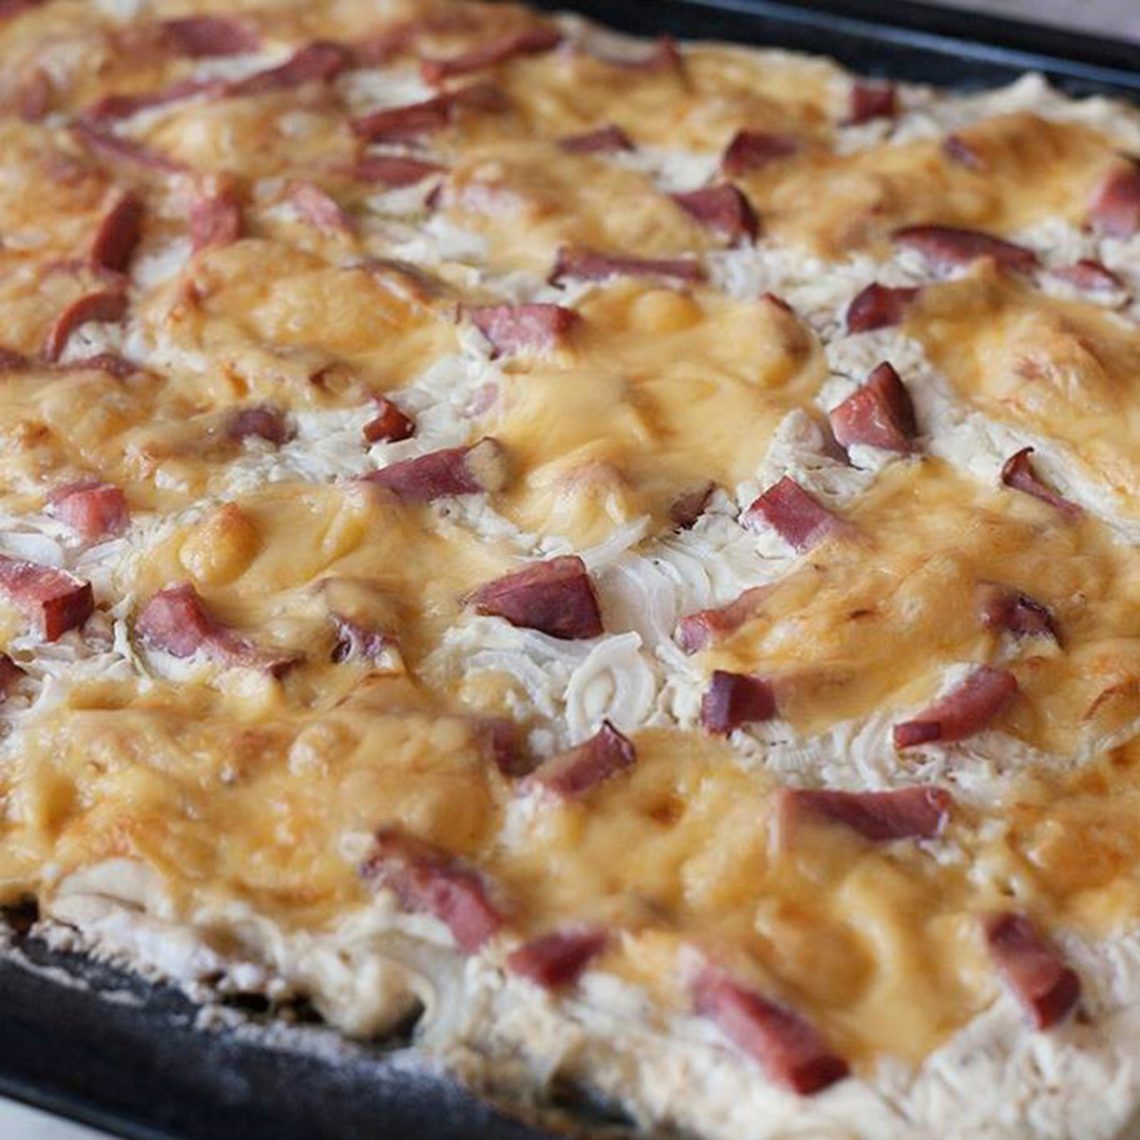 Tarte flambée or Alsace onion tart. Culinary school recipes of of world-famous dishes.